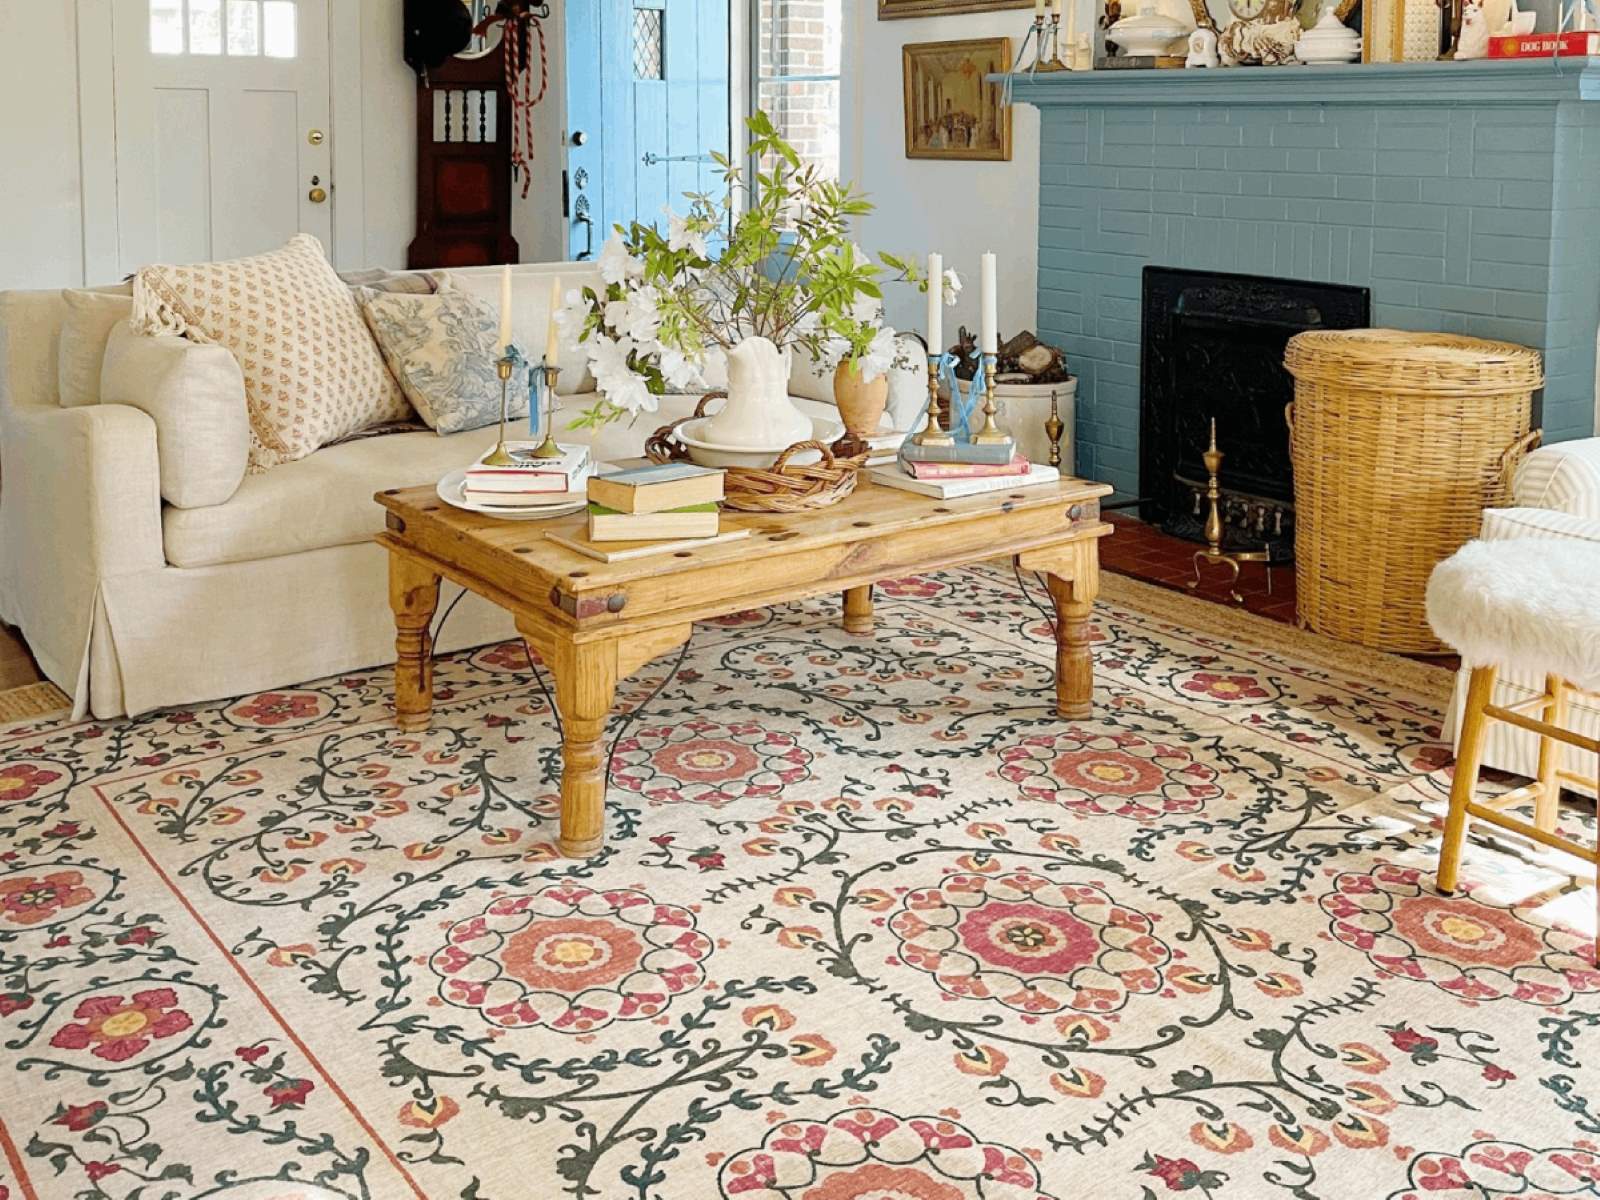 What Are Ruggable Rugs Made Of